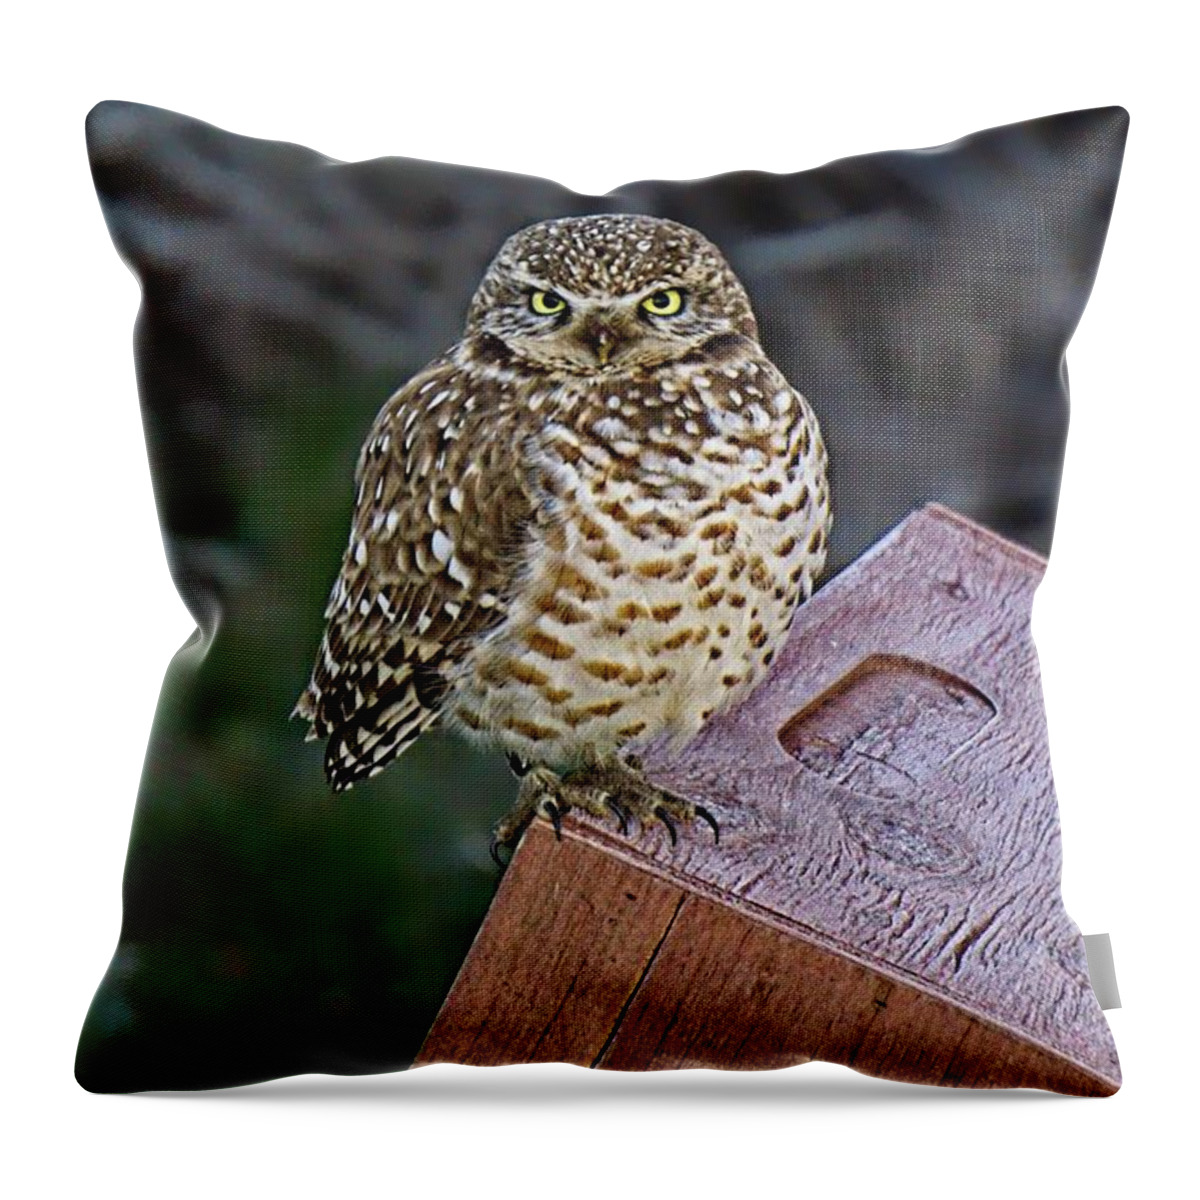 Alone Throw Pillow featuring the photograph Bright Eyes by David Desautel